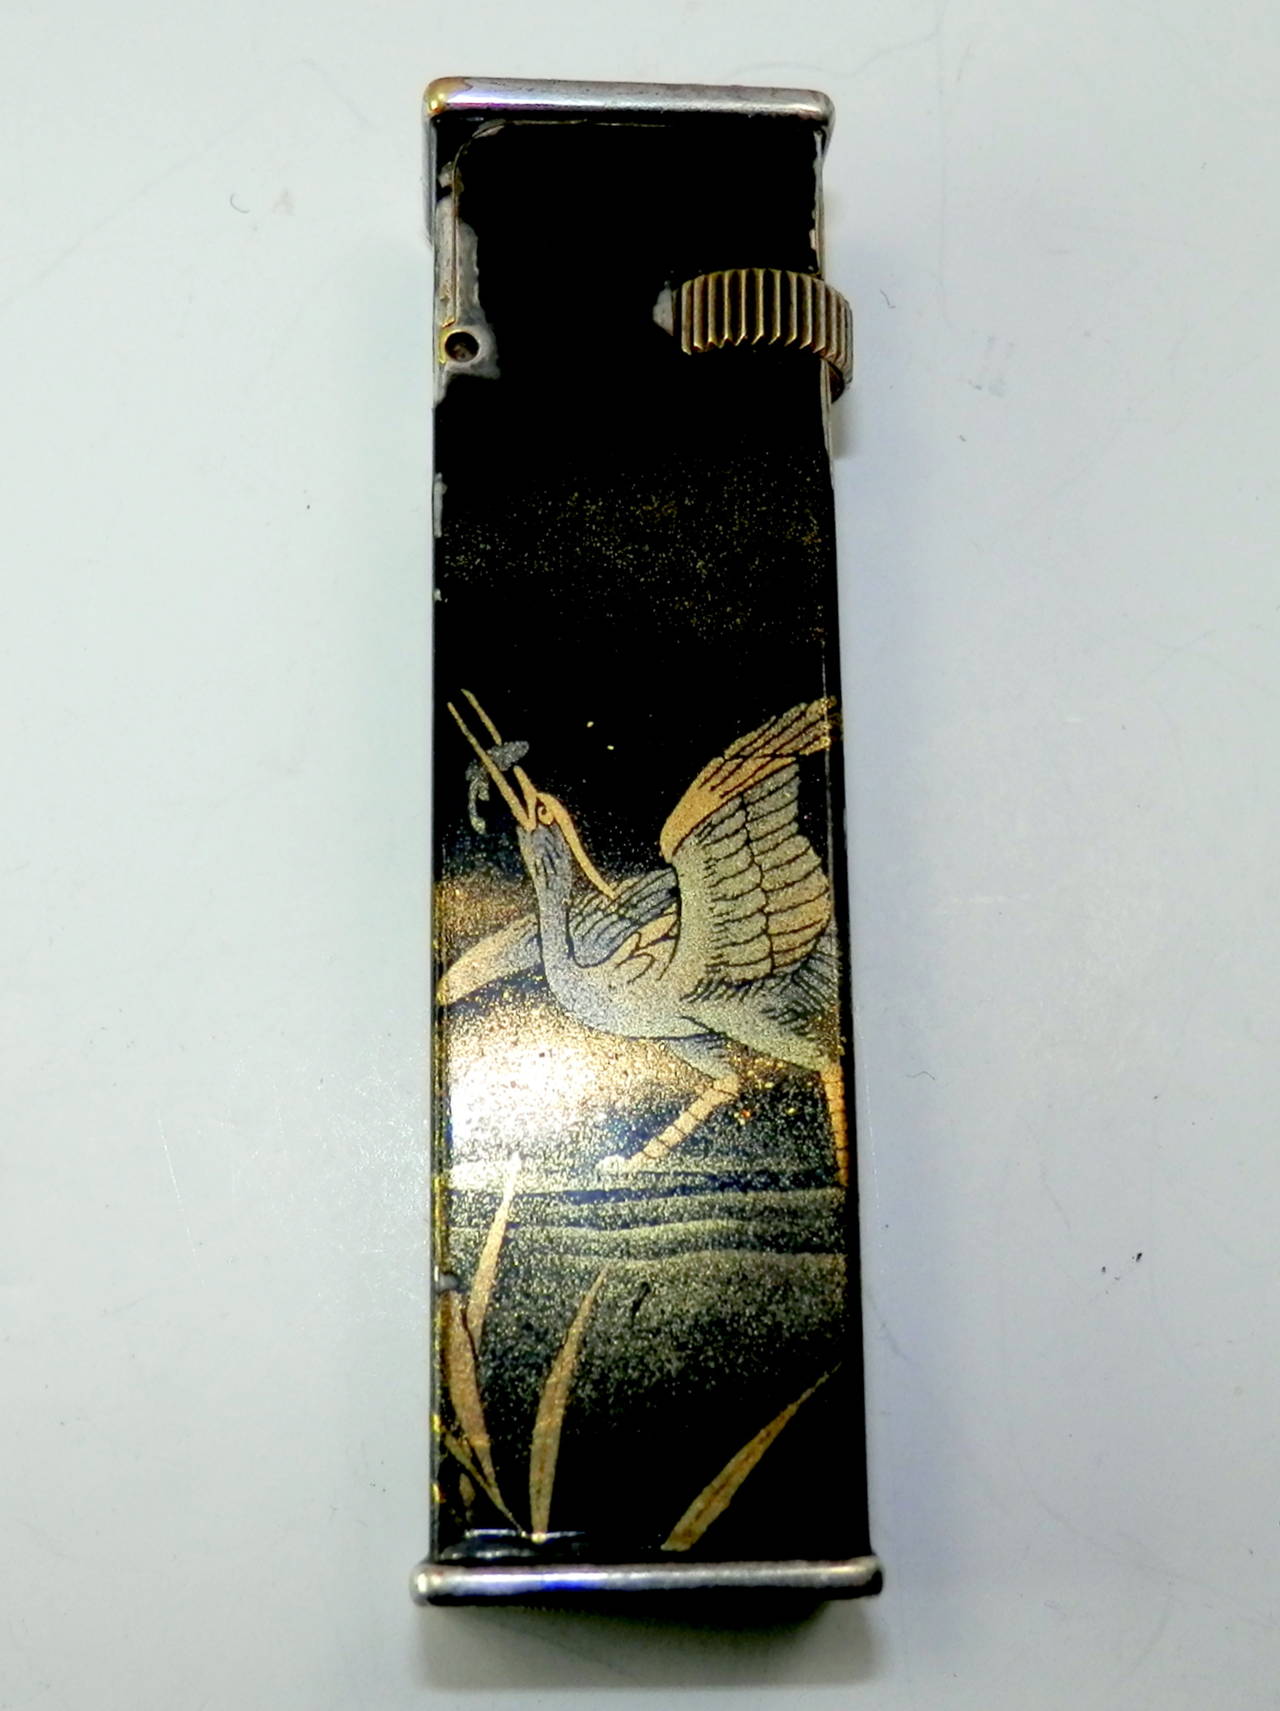 Signed underneath Cartier-License, Dunhill, fab. Suisse, with a hallmark of BL  Lacquer.  Works but needs lighter fluid.  Mid 20th century.  Beautiful motif of a bird catching fish which continues to the back.  Asian writing symbols on the lower